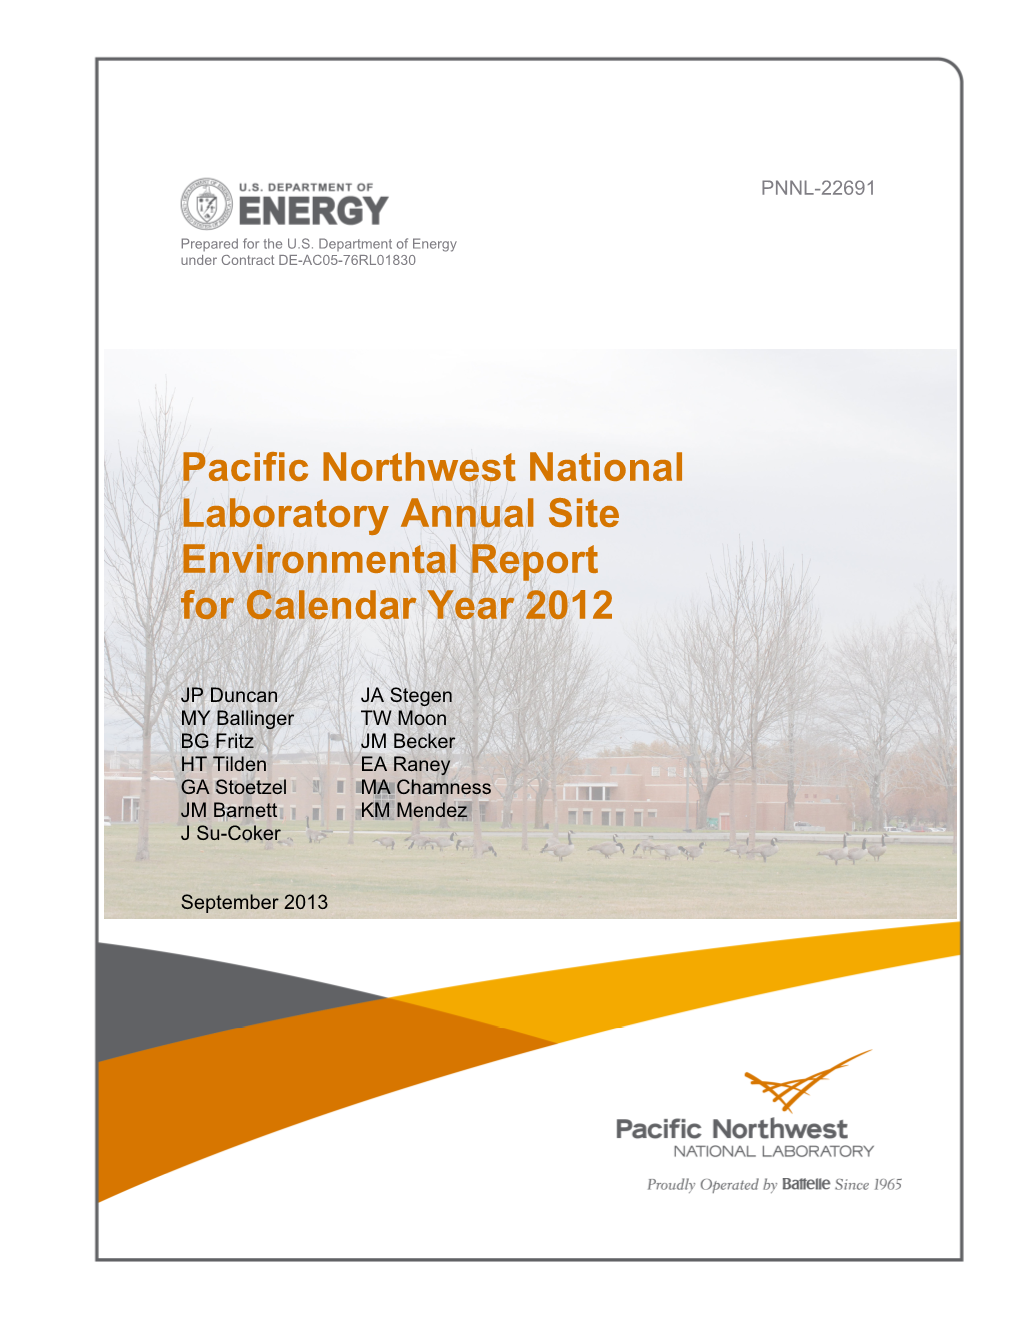 Pacific Northwest National Laboratory Annual Site Environmental Report for Calendar Year 2012